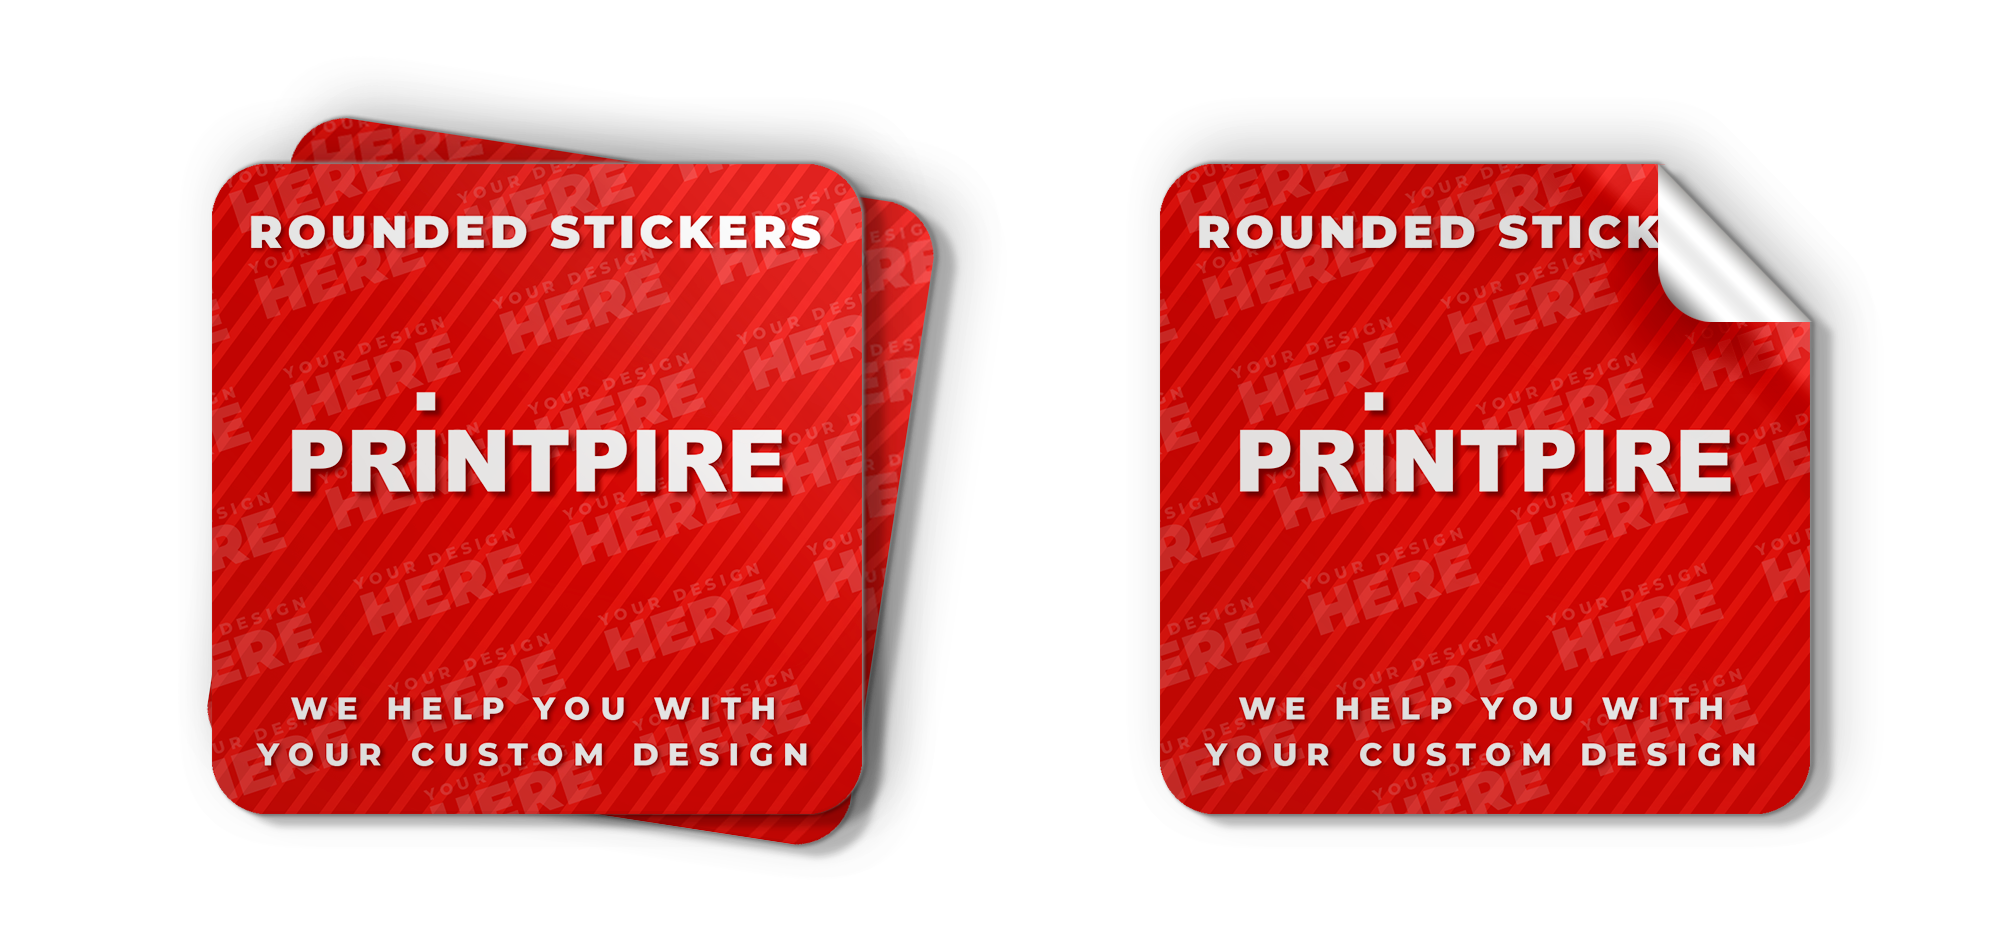 Rounded Stickers